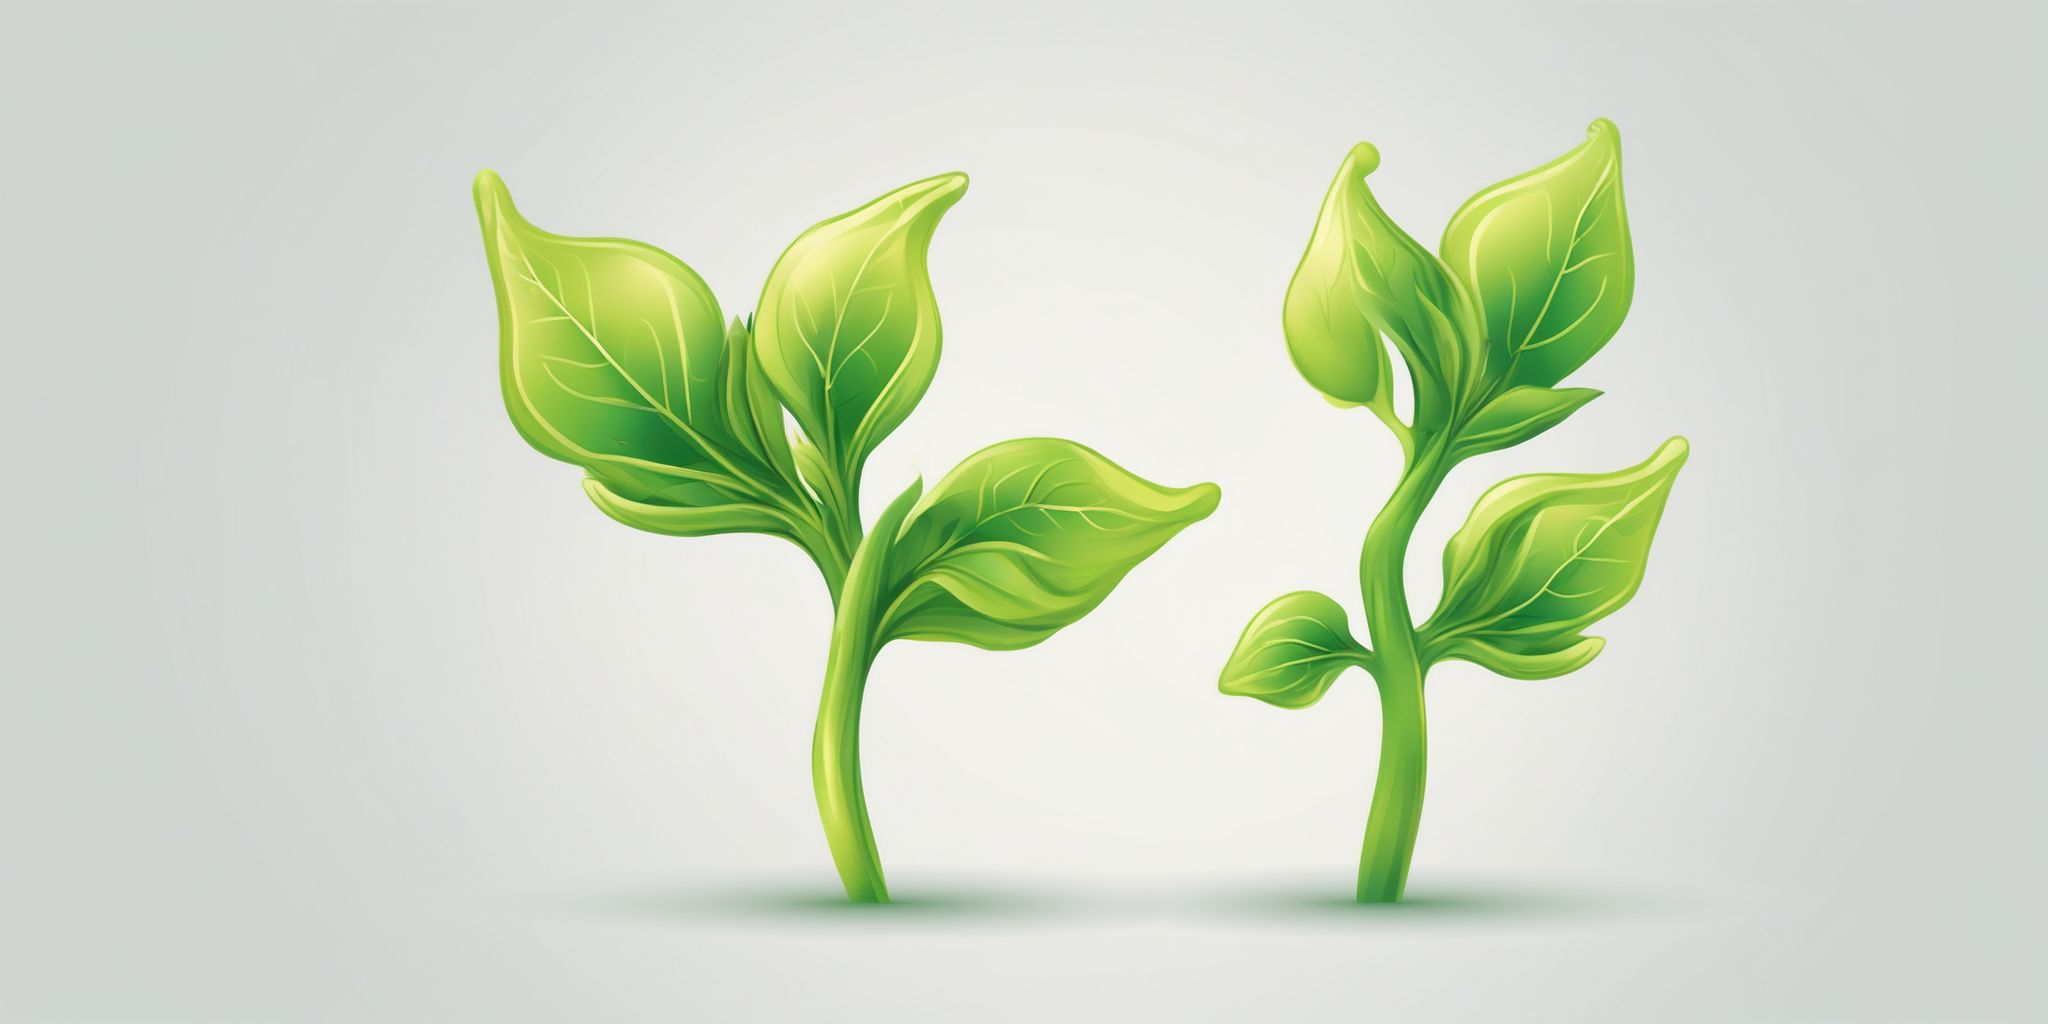 sprout in illustration style with gradients and white background